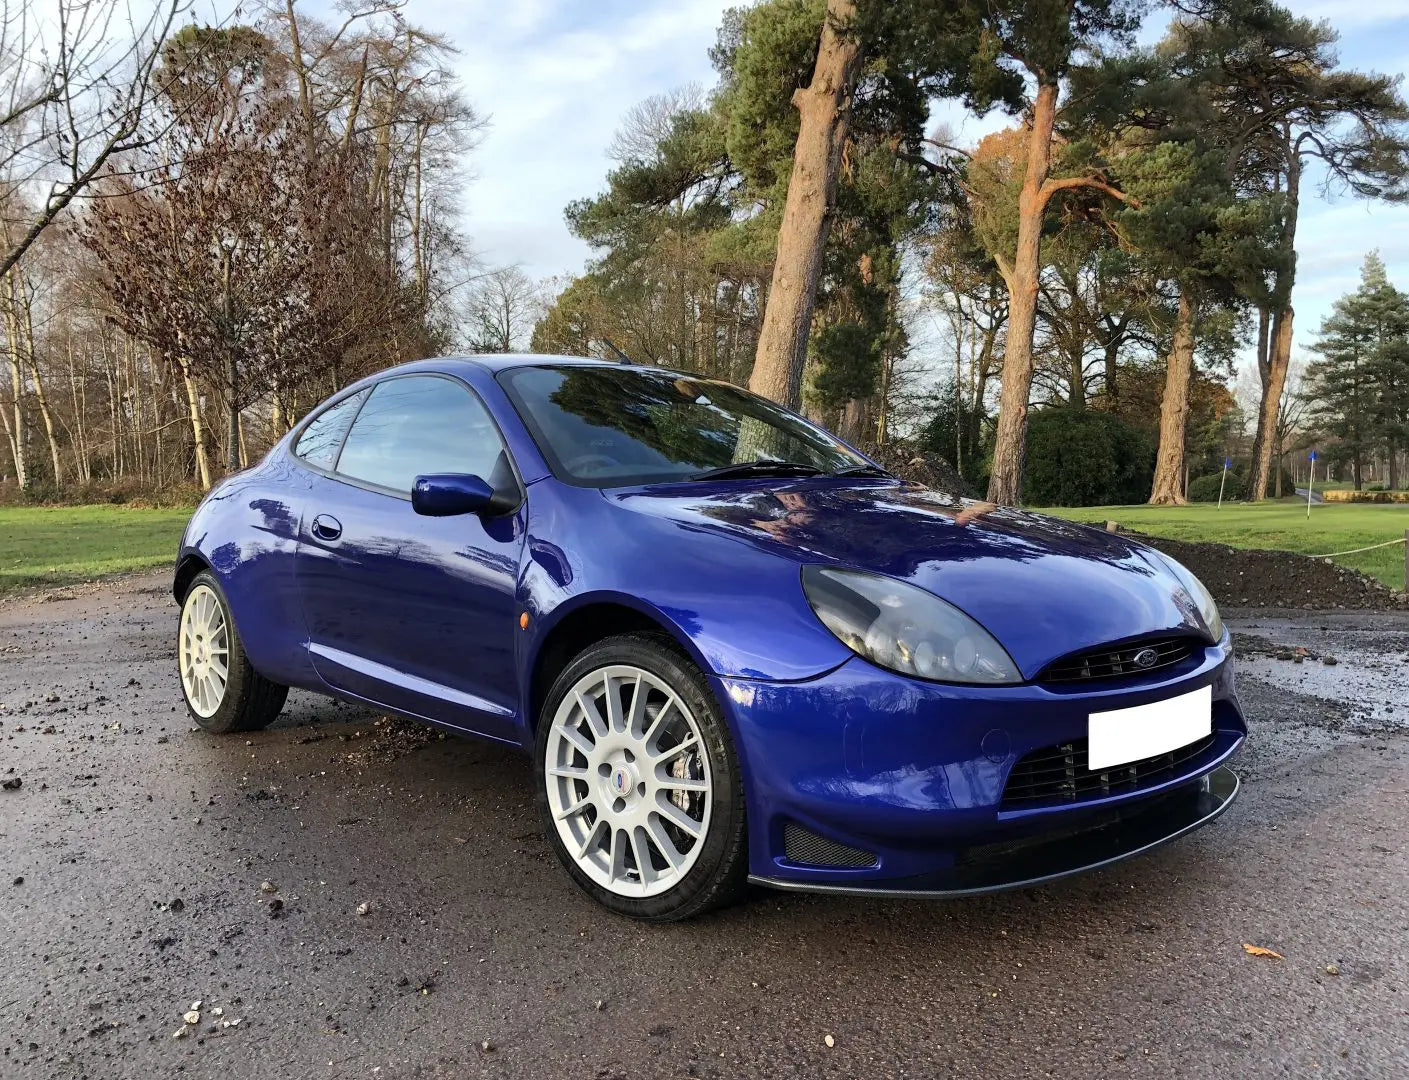 The Ford Racing Puma – An Insight